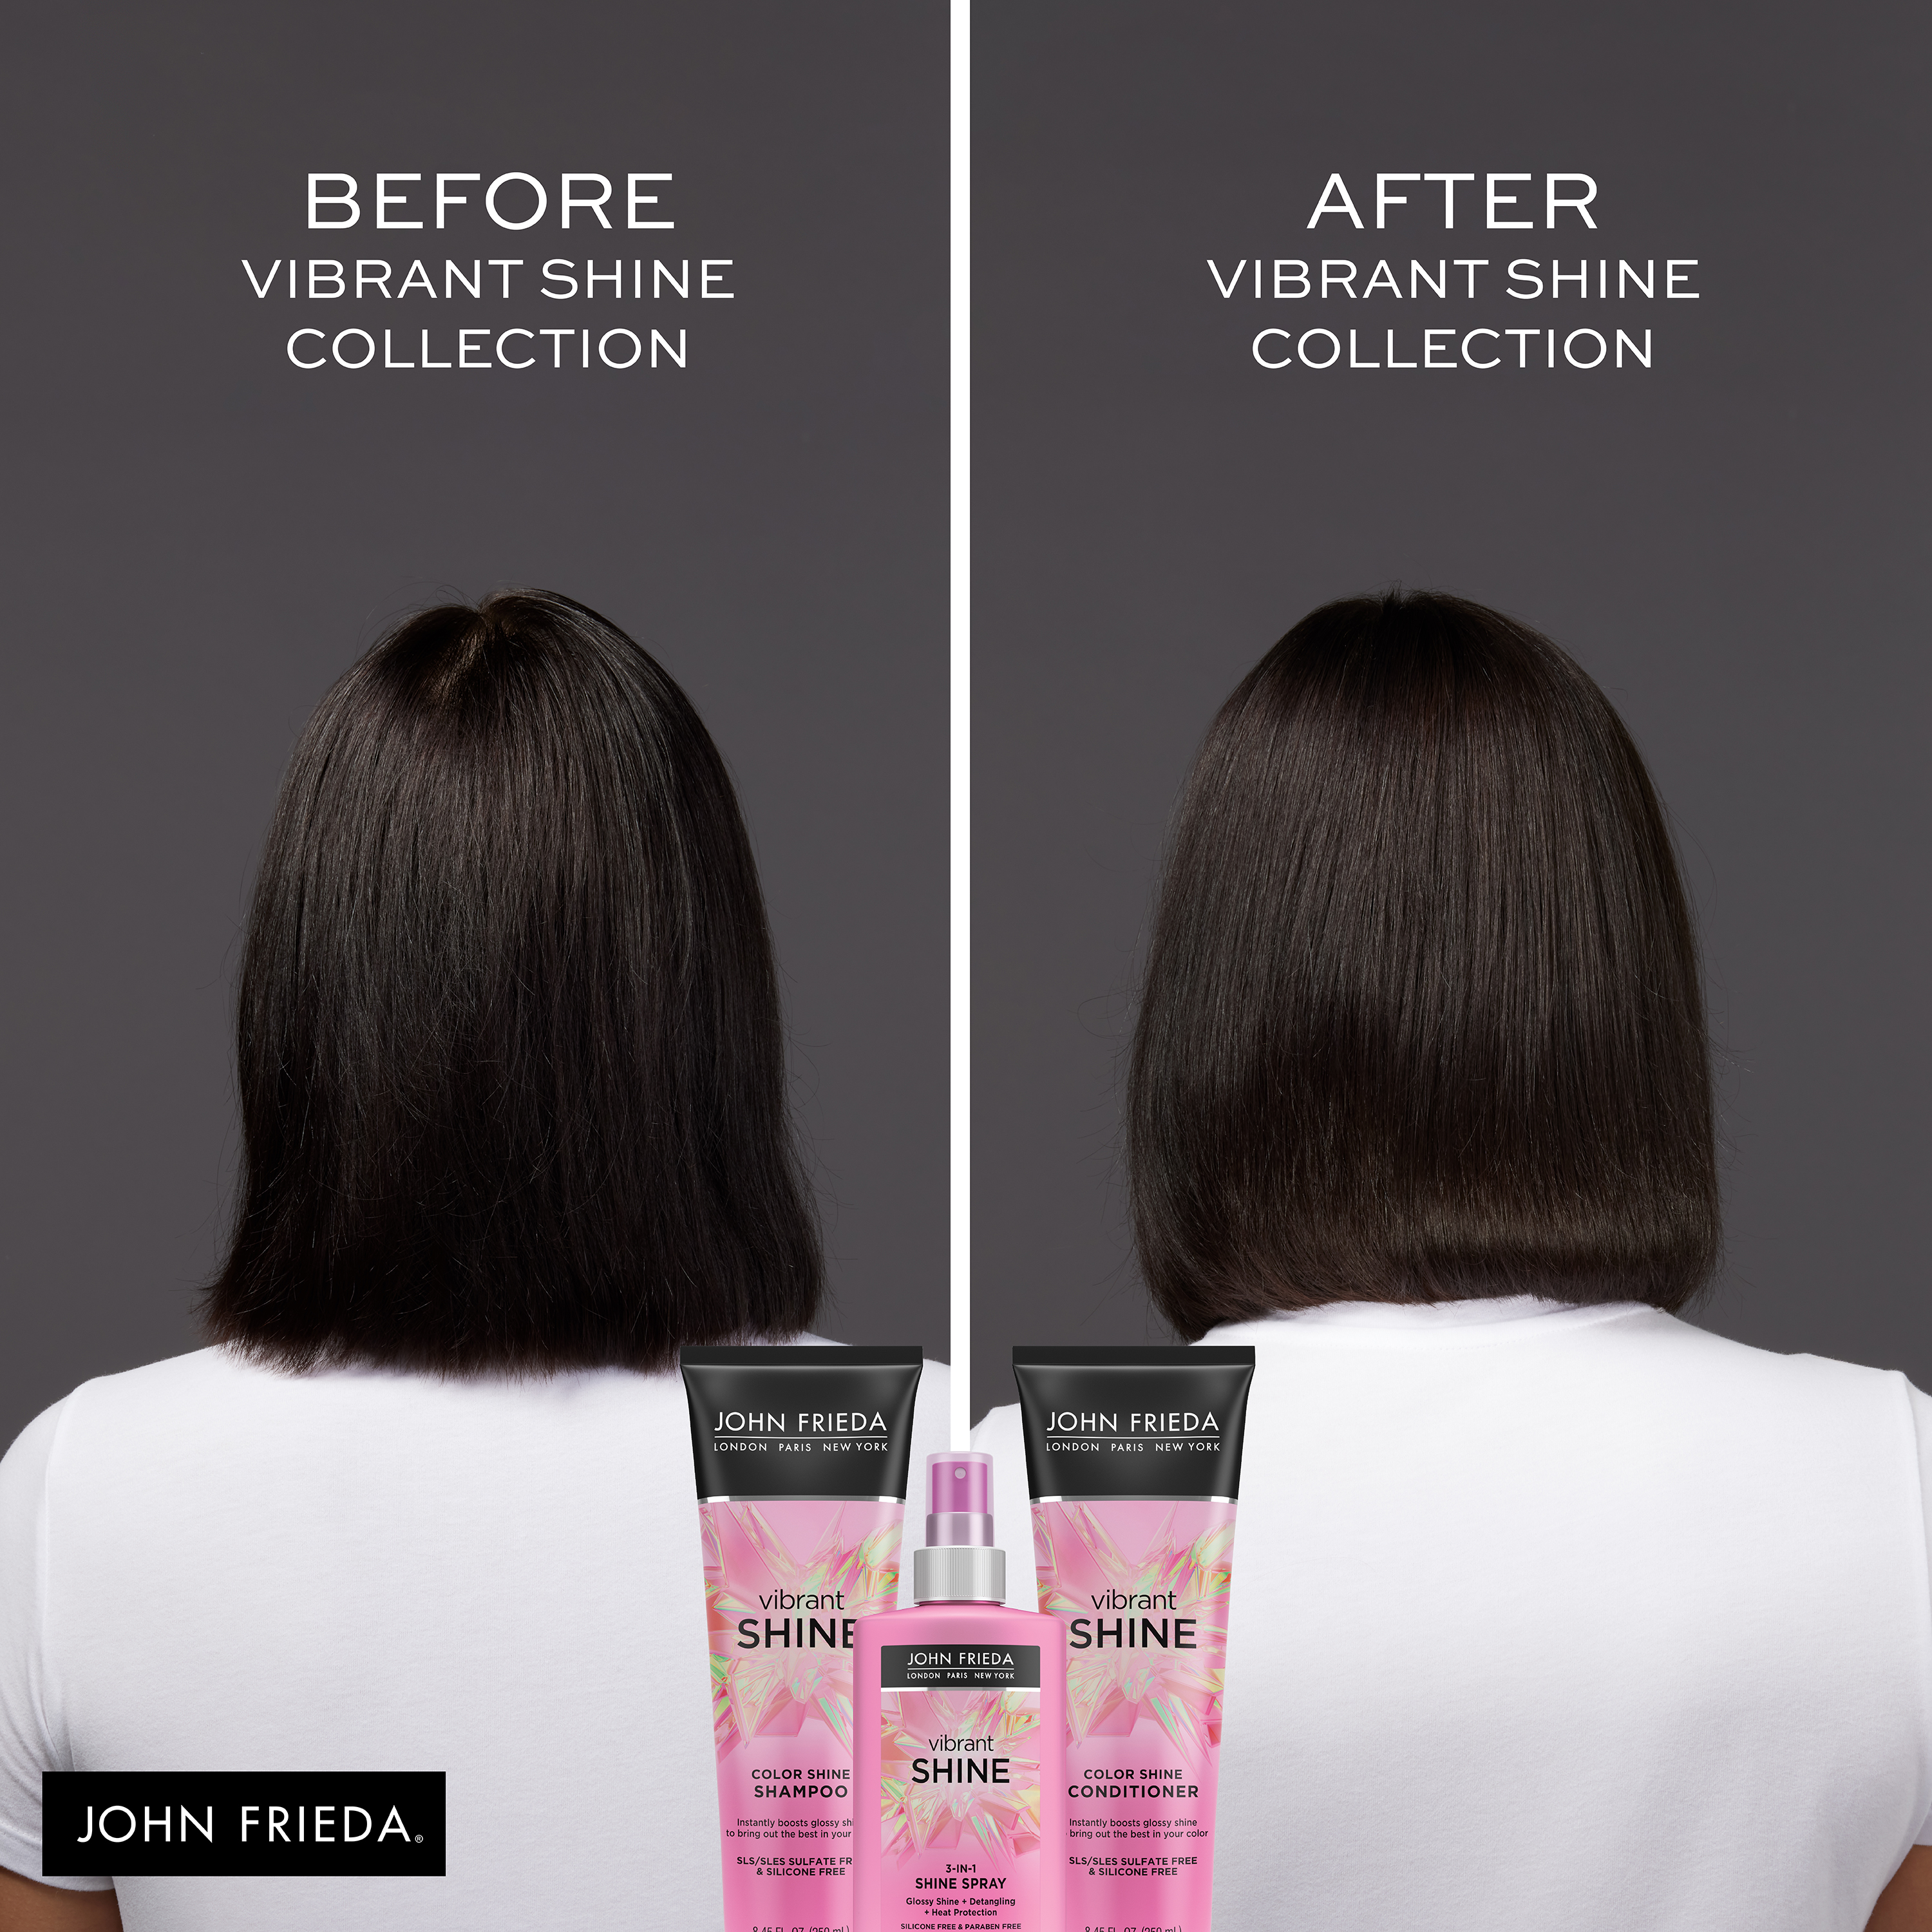 Before/after hair using the Vibrant Shine collection.